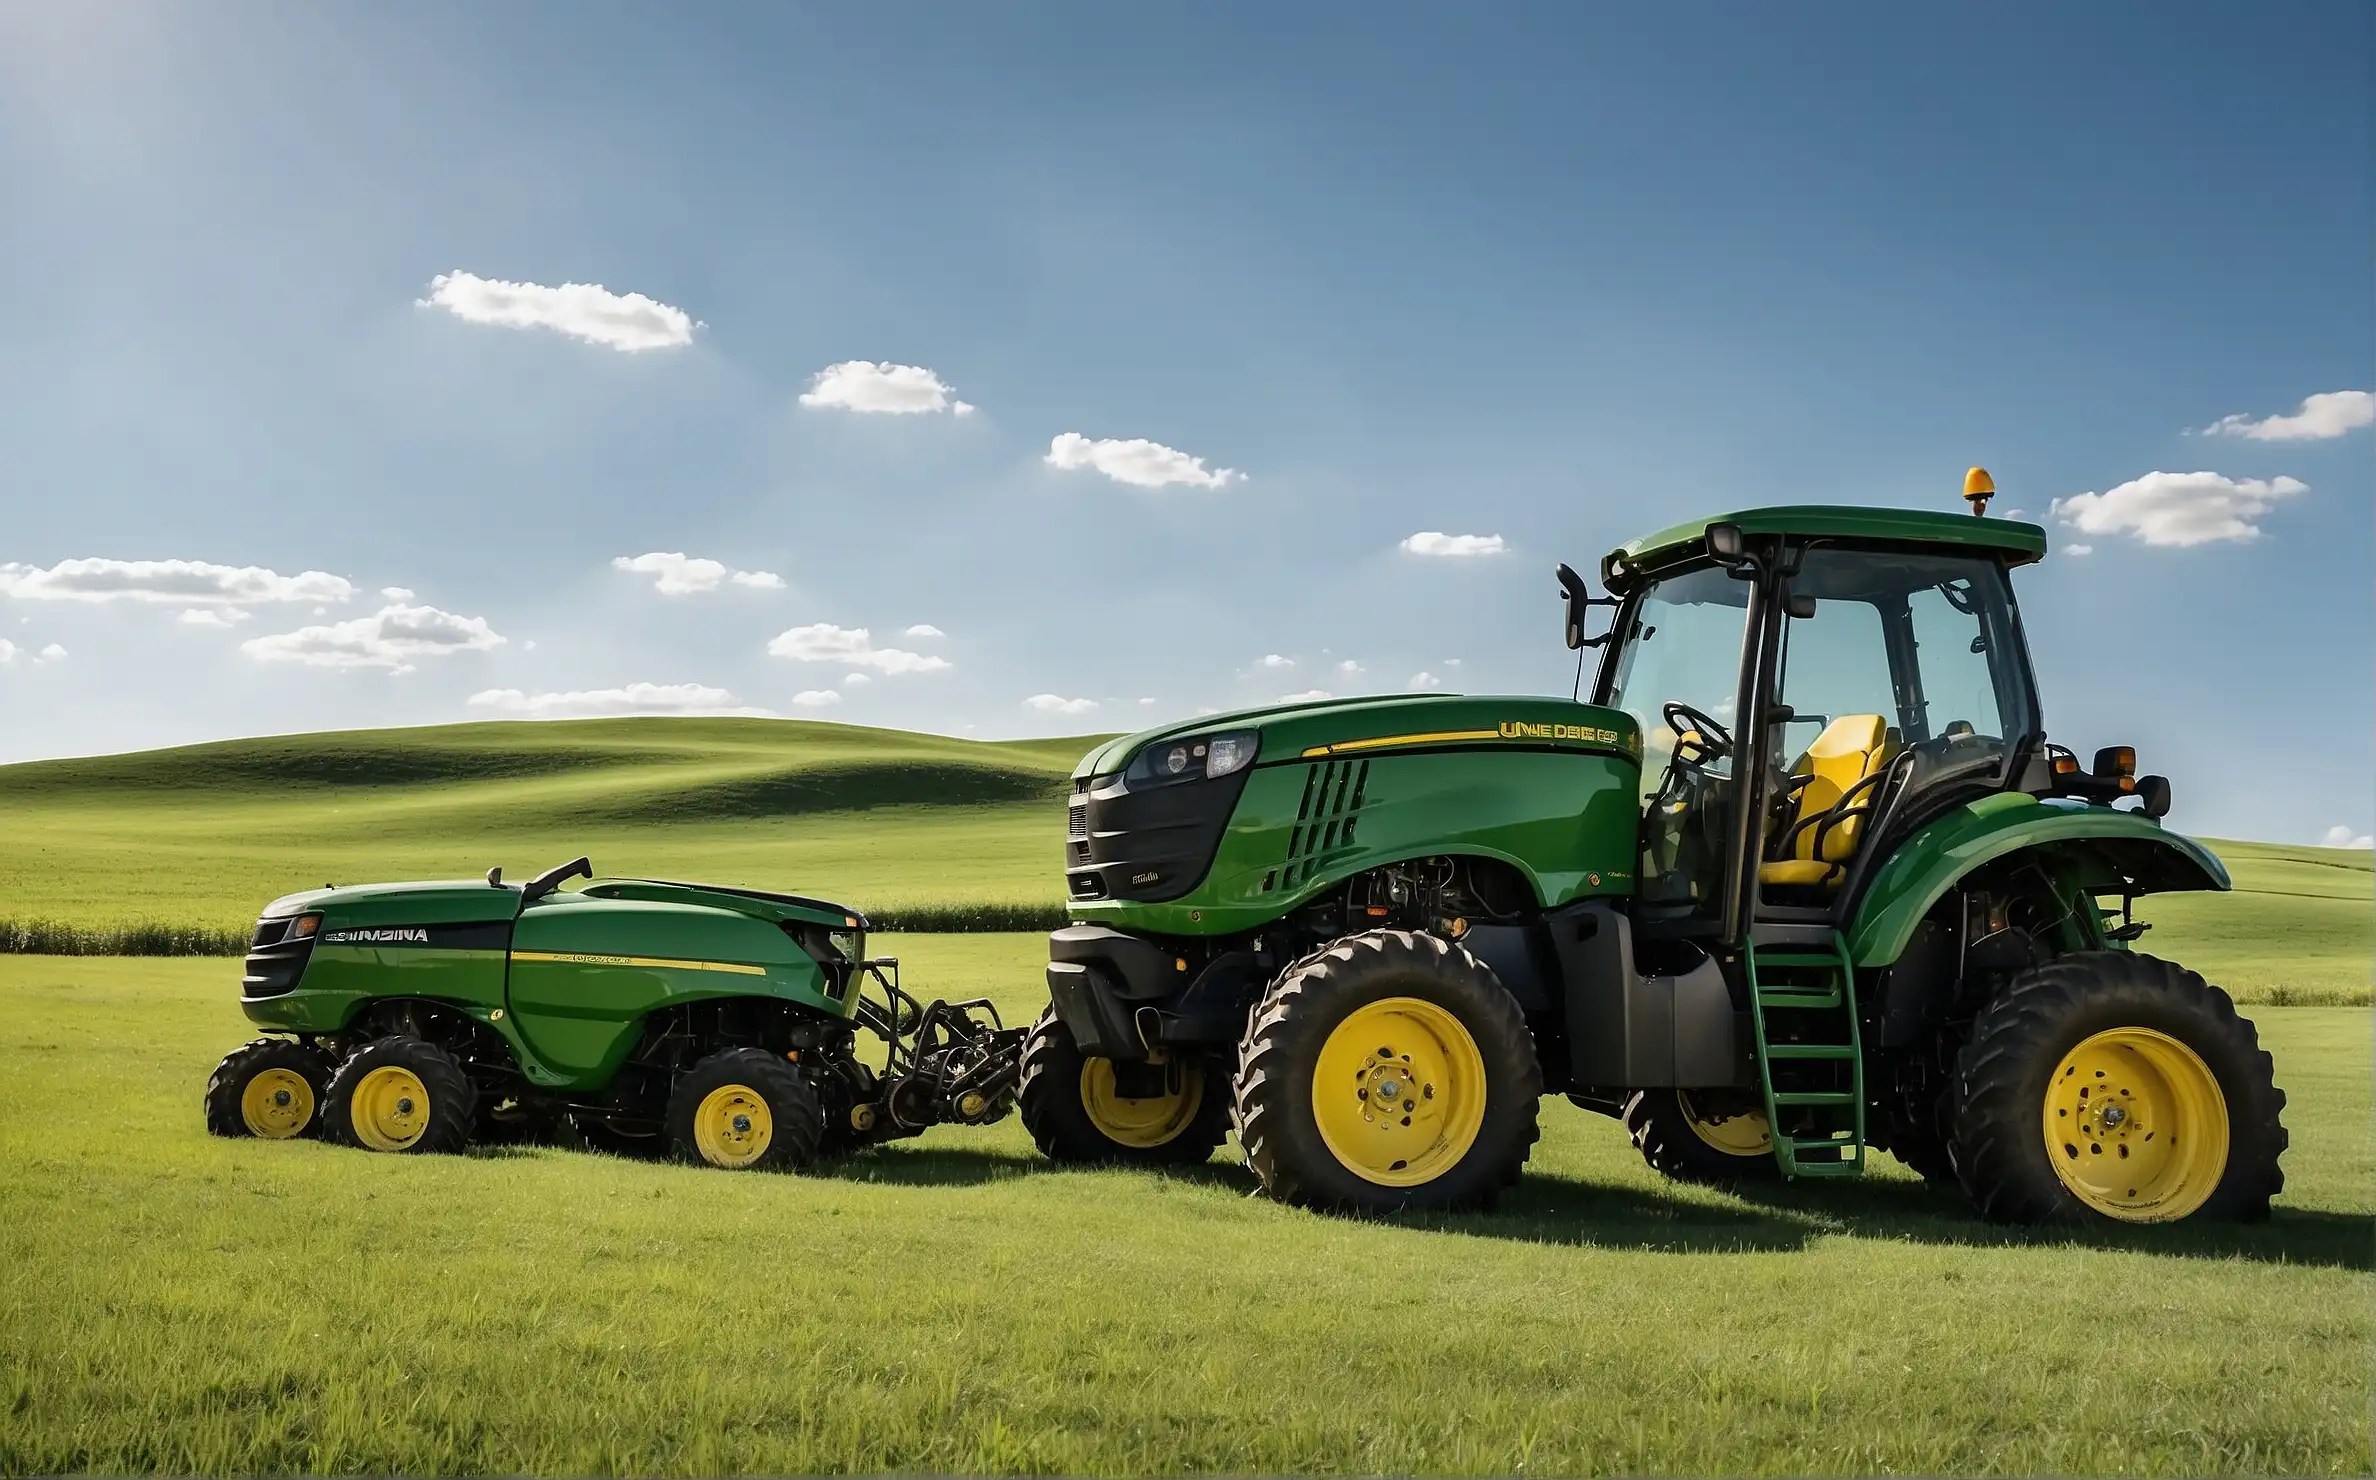 John Deere S180 vs E180: Which One to Choose?